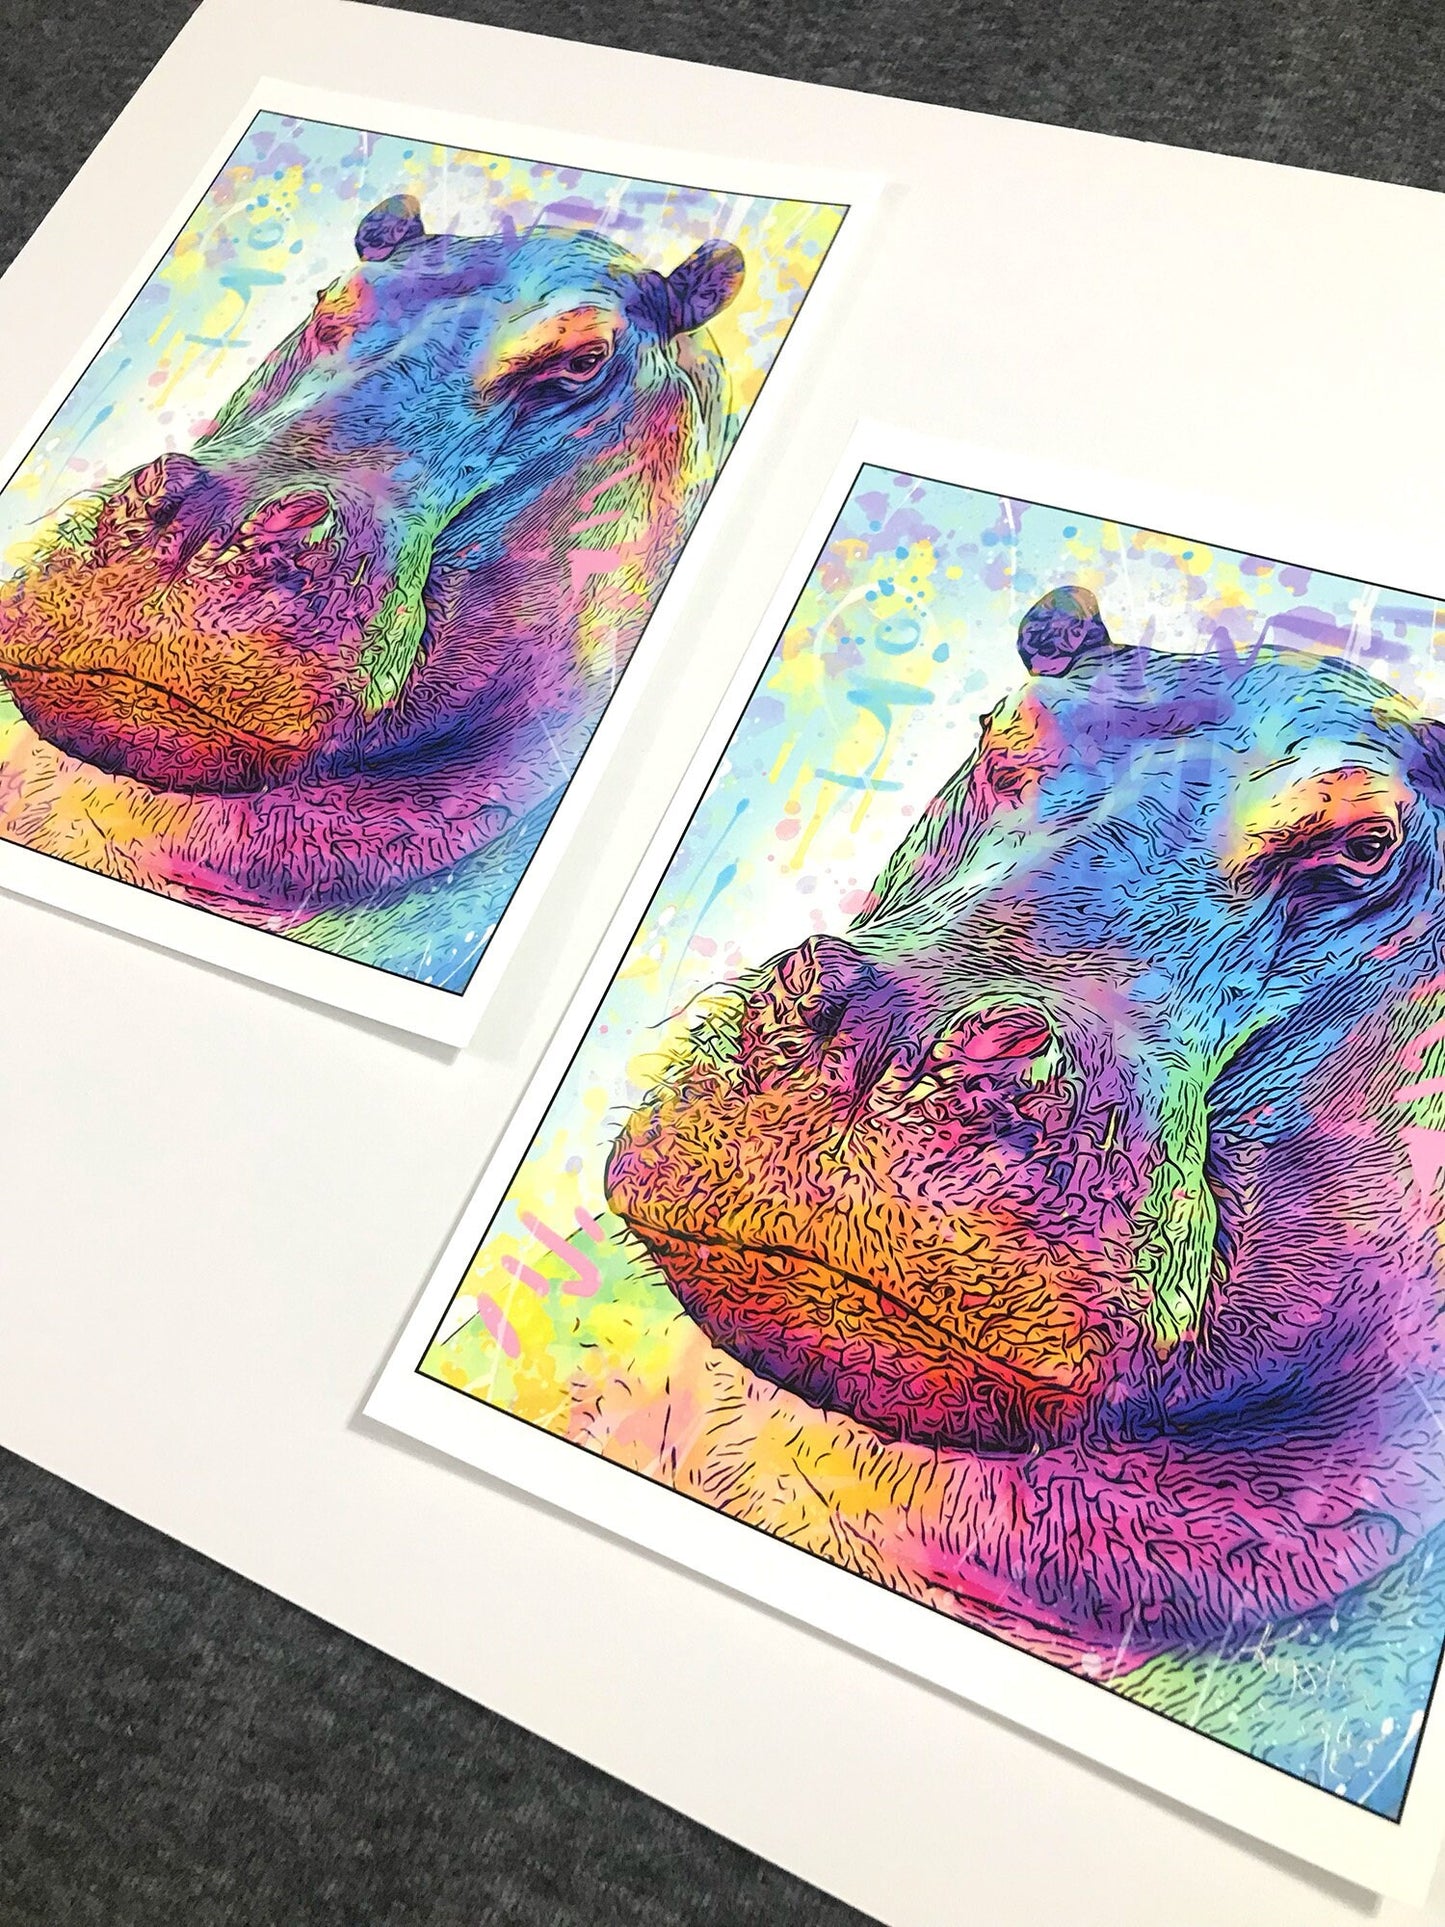 Hippo Art Print on CANVAS or PAPER - Hippopotamus Painting by Krystle Cole *Each Print Hand Signed*